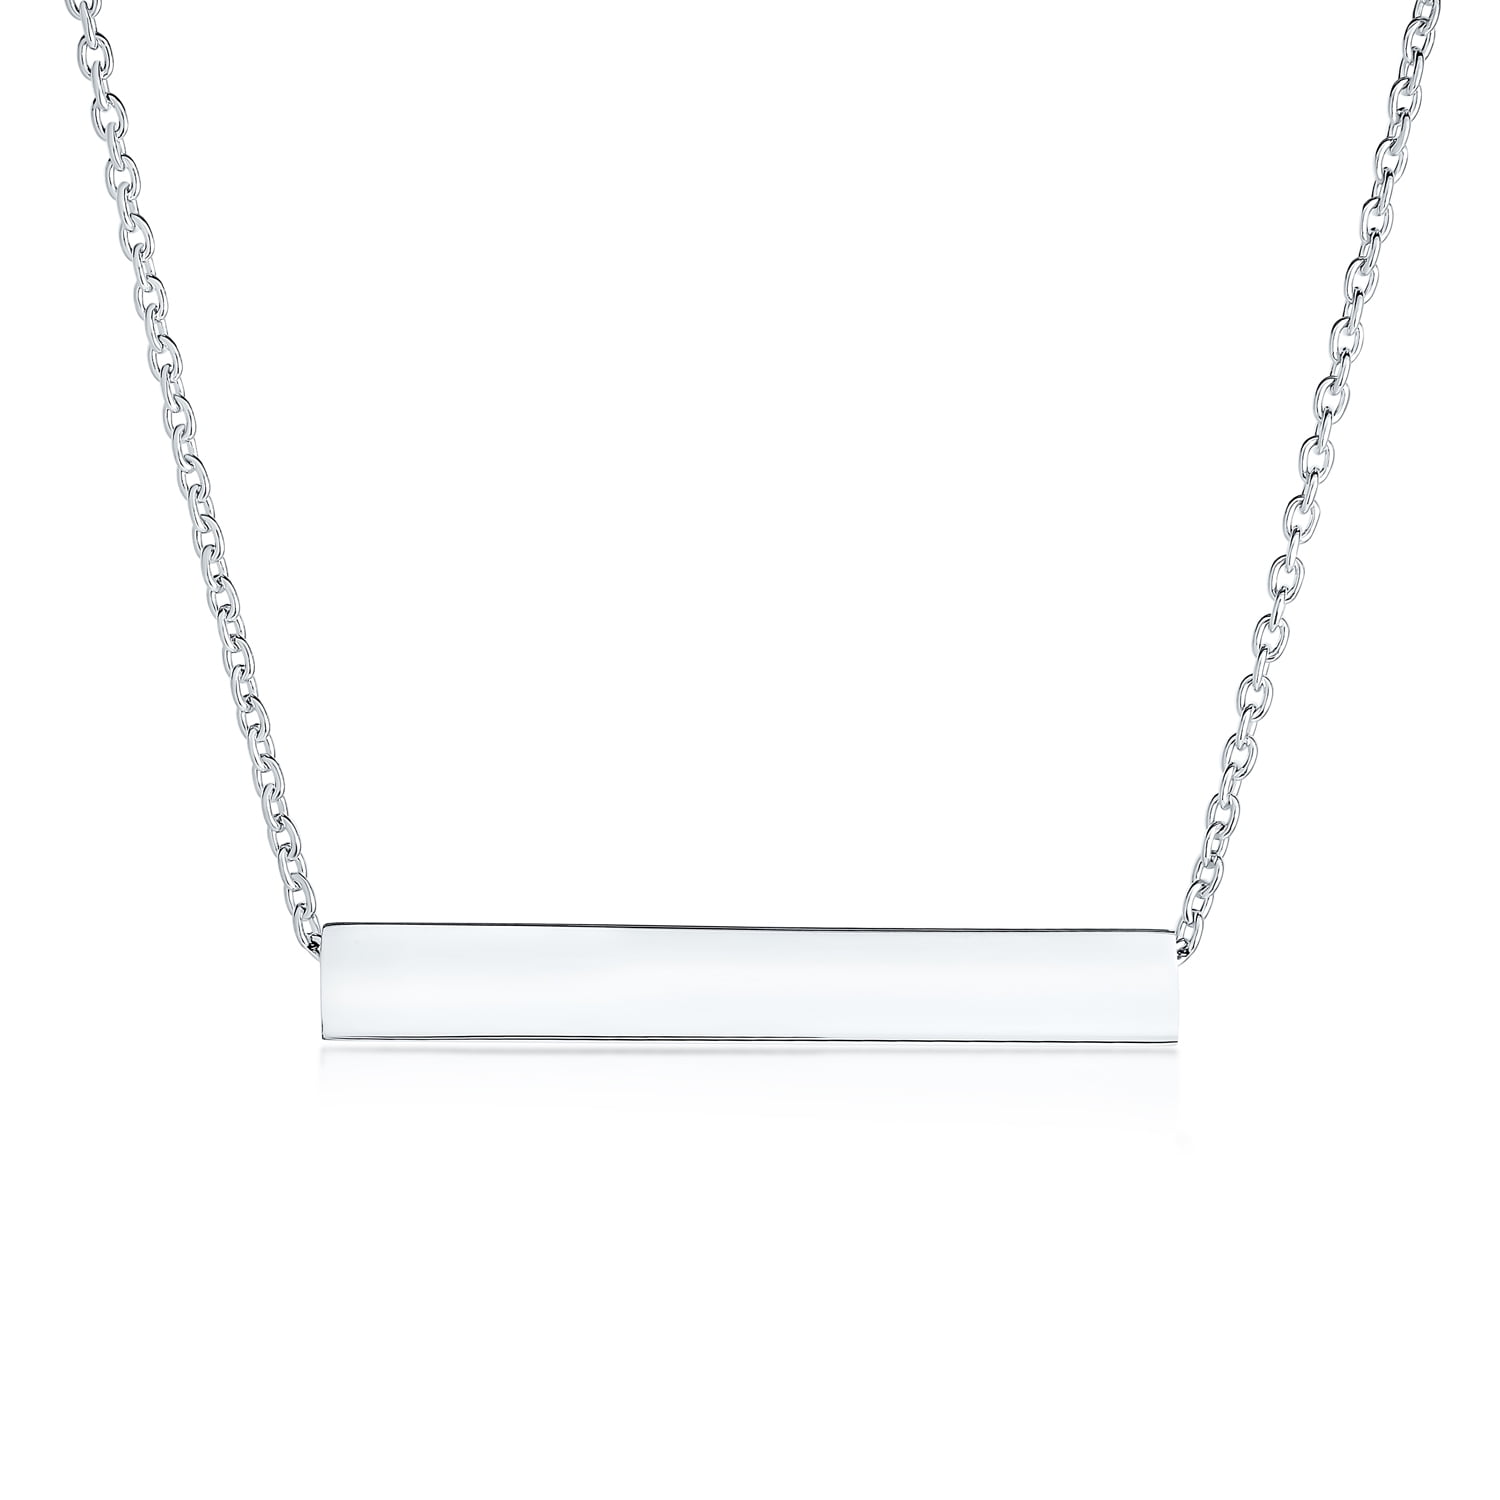 Personalized Solid Pure Silver Bar Horizontal Silver Bar Necklace 